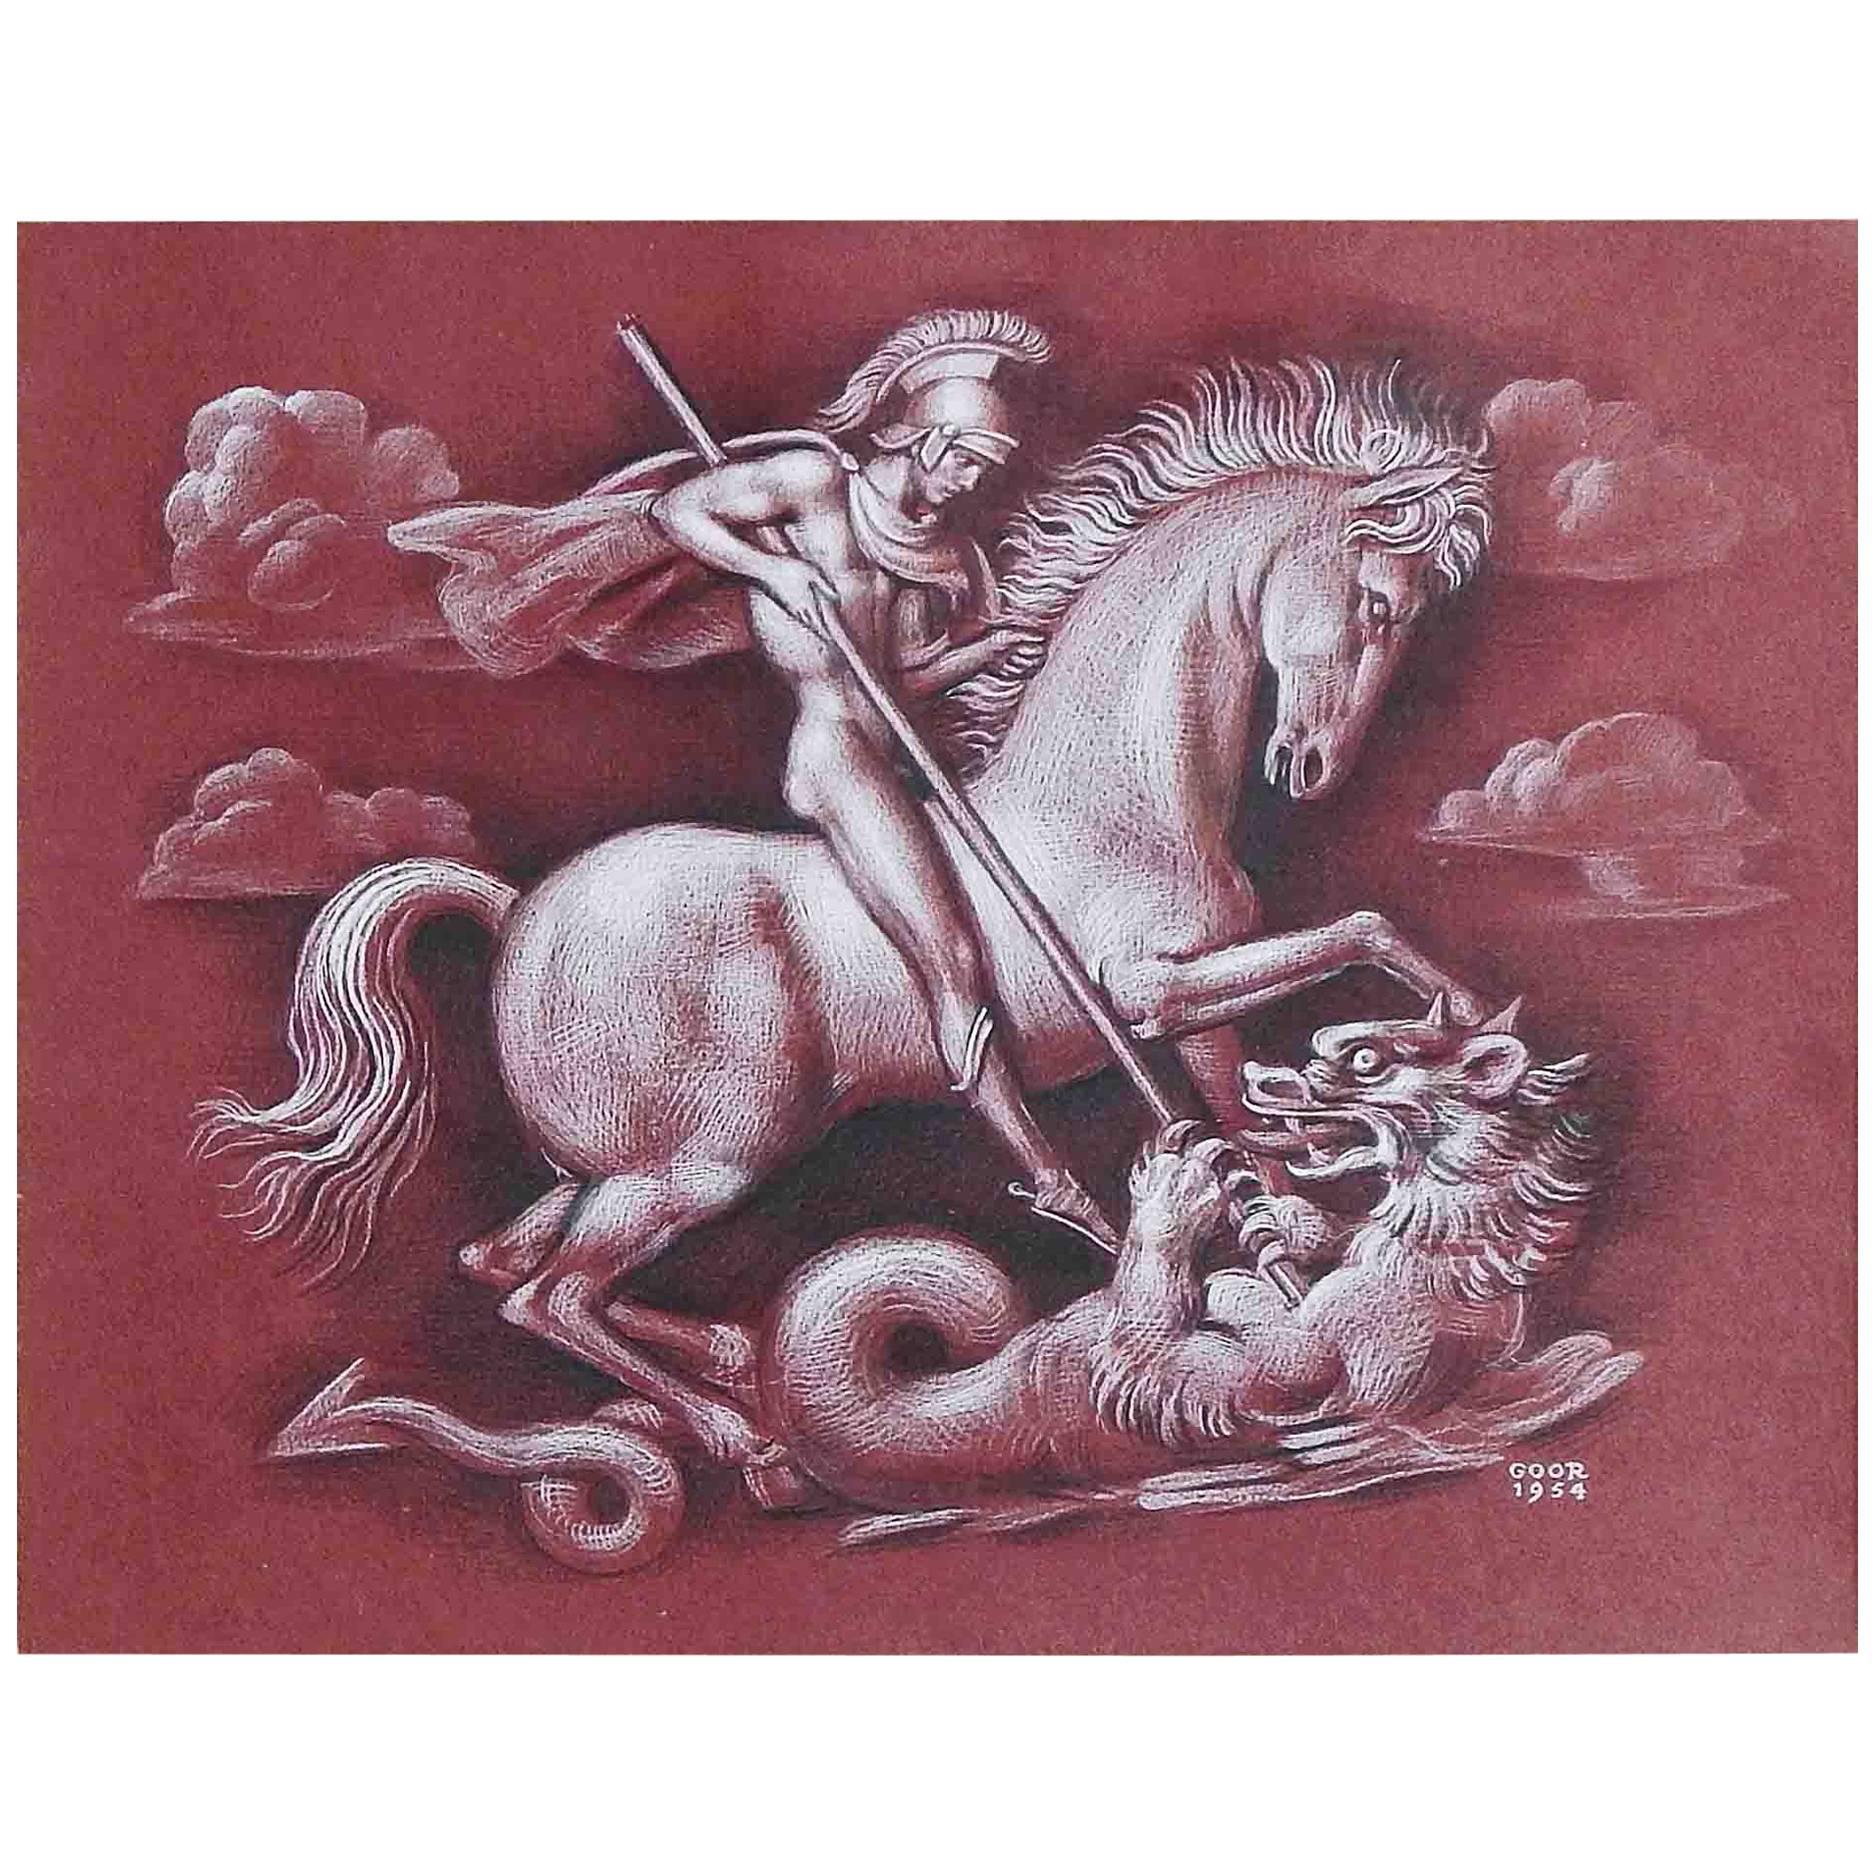 "St. George and the Dragon, " Art Deco Drawing with Male Nude by Goor